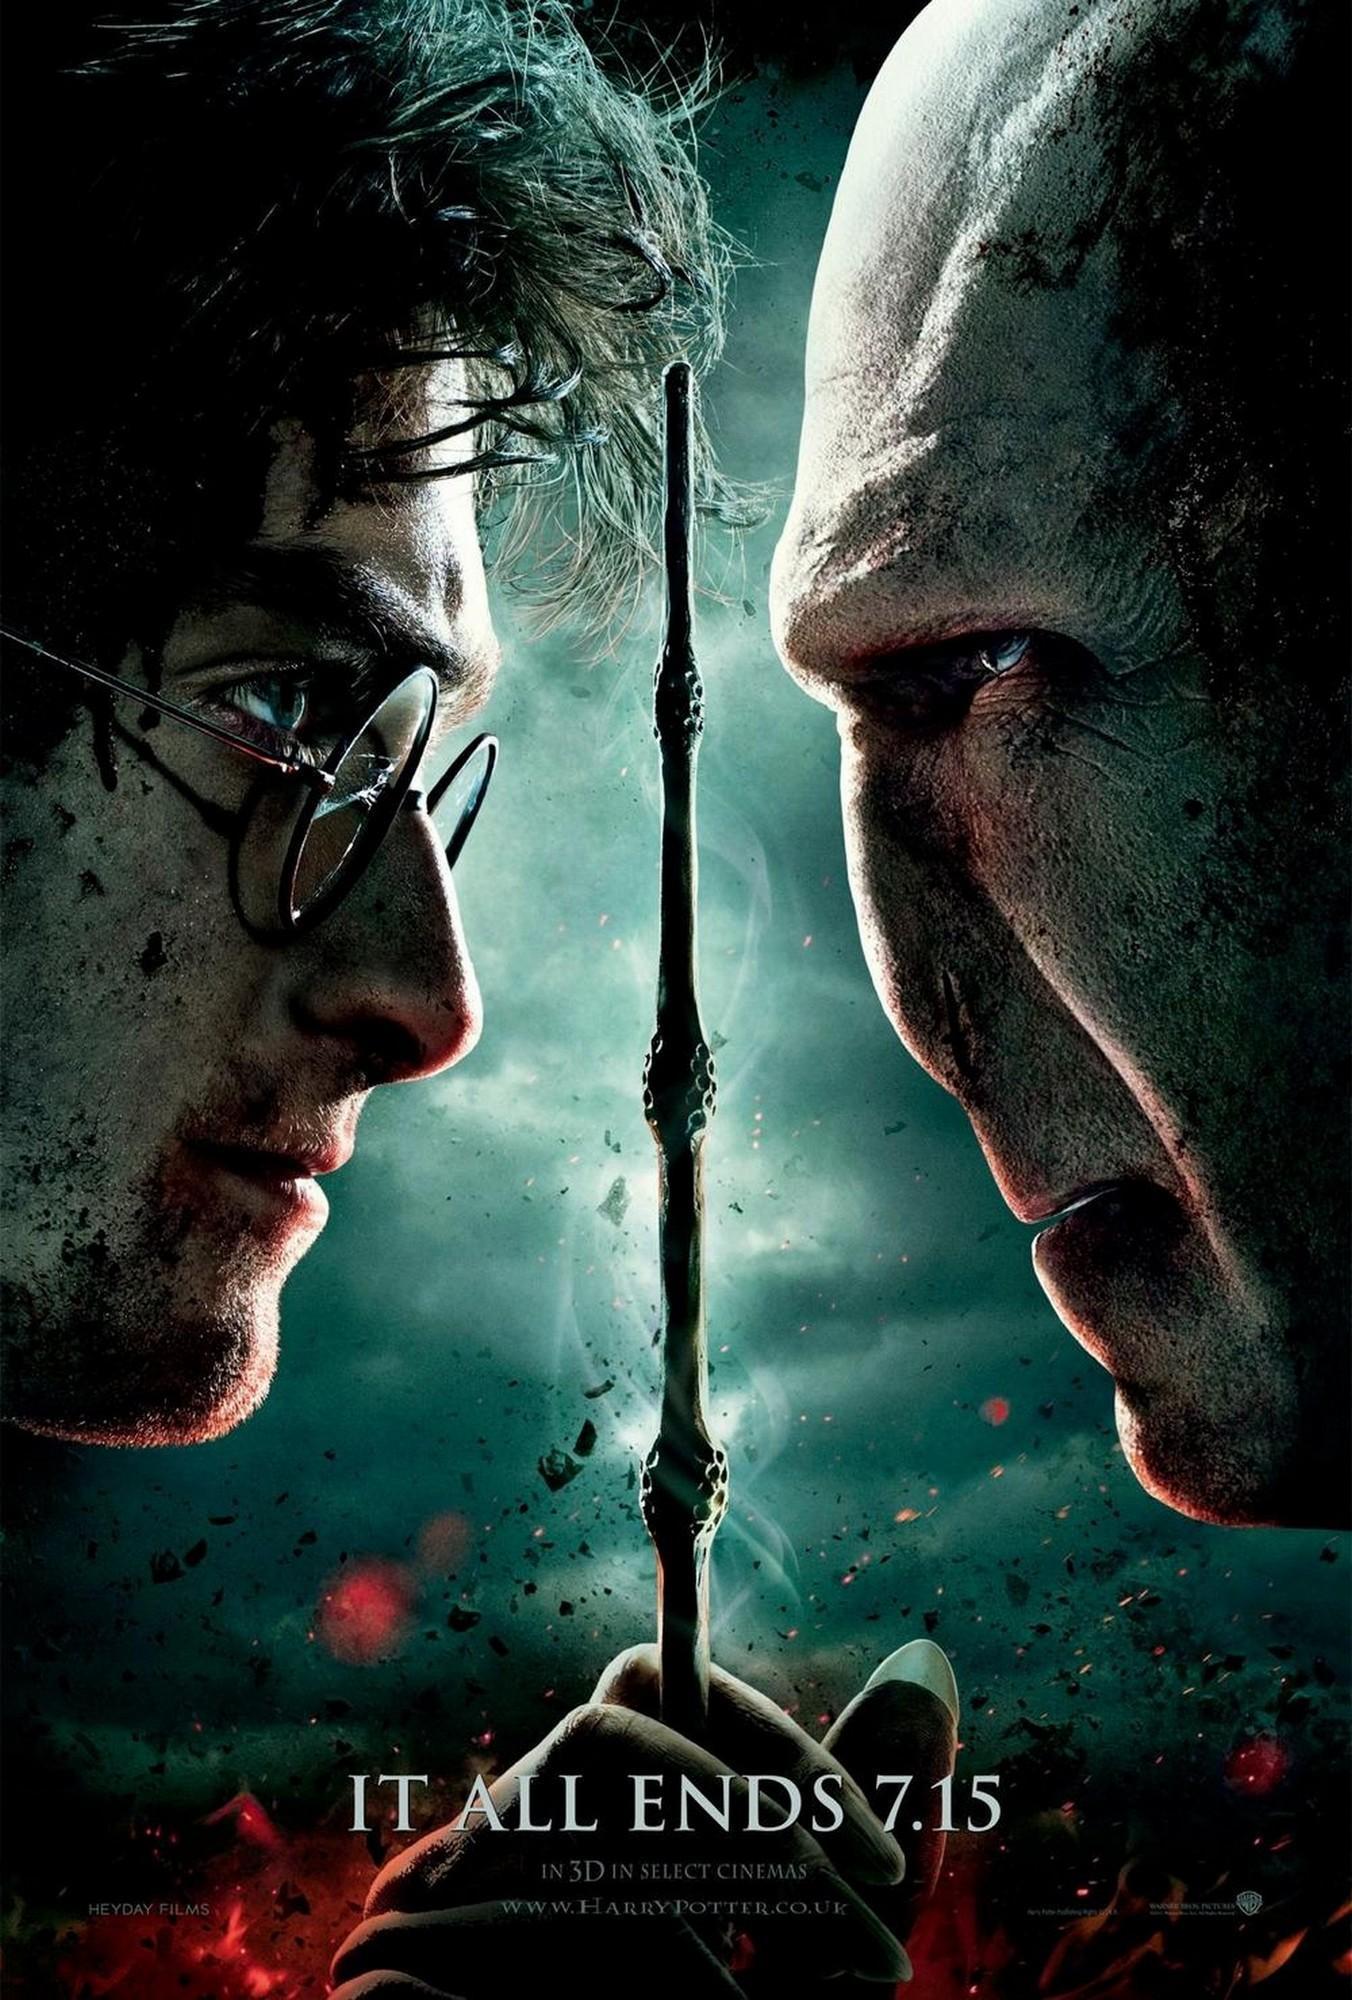 download harry potter deathly hallows part 2